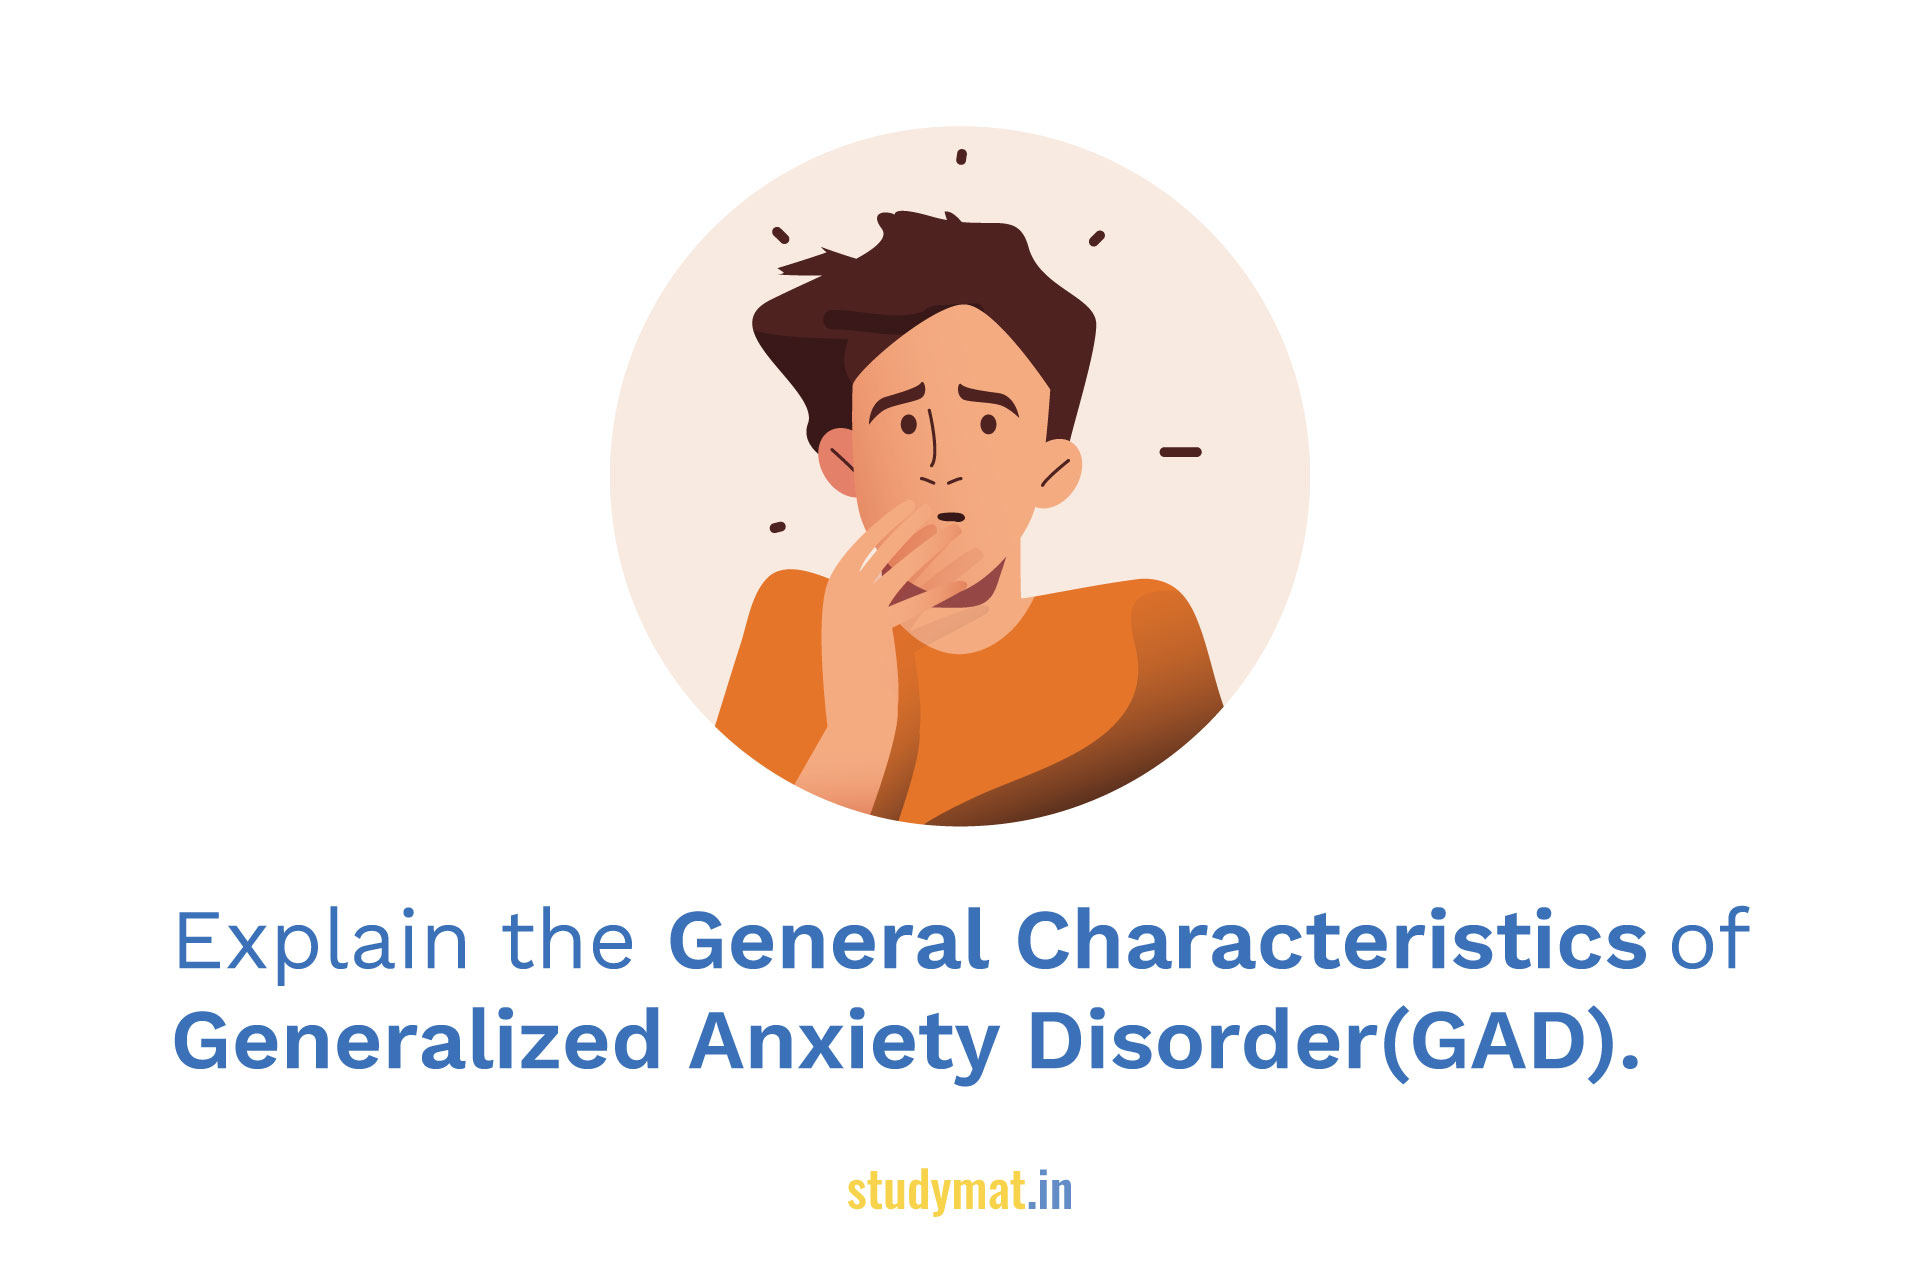 General-Characteristics-of-Generalized-Anxiety-Disorder(GAD)-studymat.in